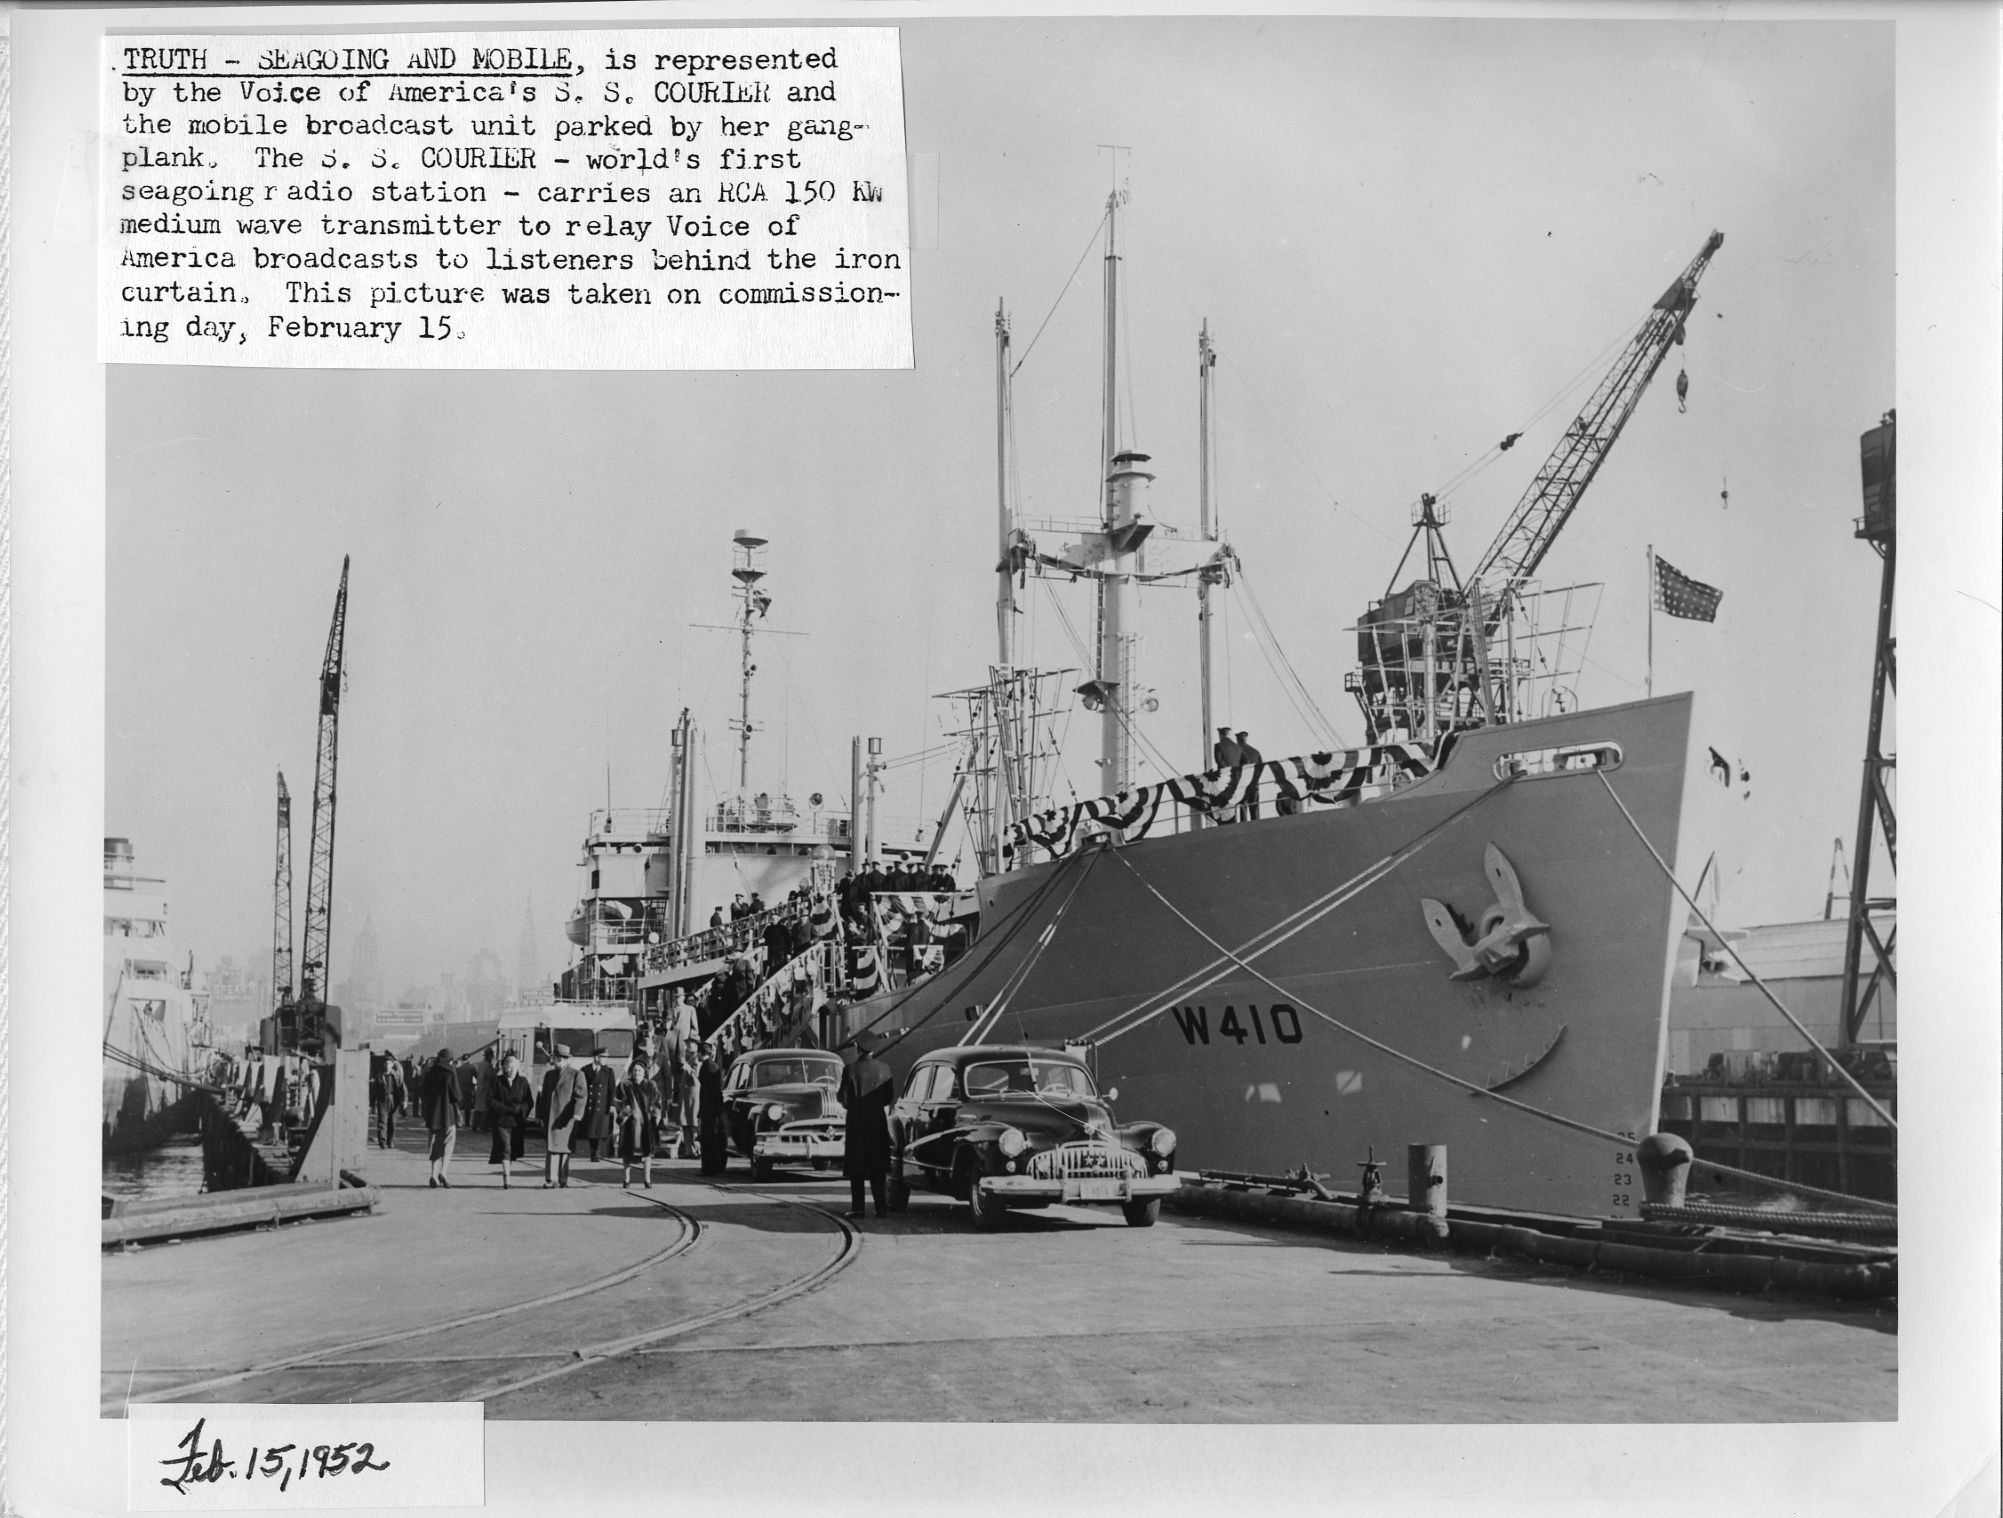 The Feb. 15, 1952, commissioning of Coast Guard Cutter Courier, “world’s first seagoing radio station.” (The crew of the Coast Guard Cutter Courier, as collected by the Coast Guard Cutter Courier/VOA Association)